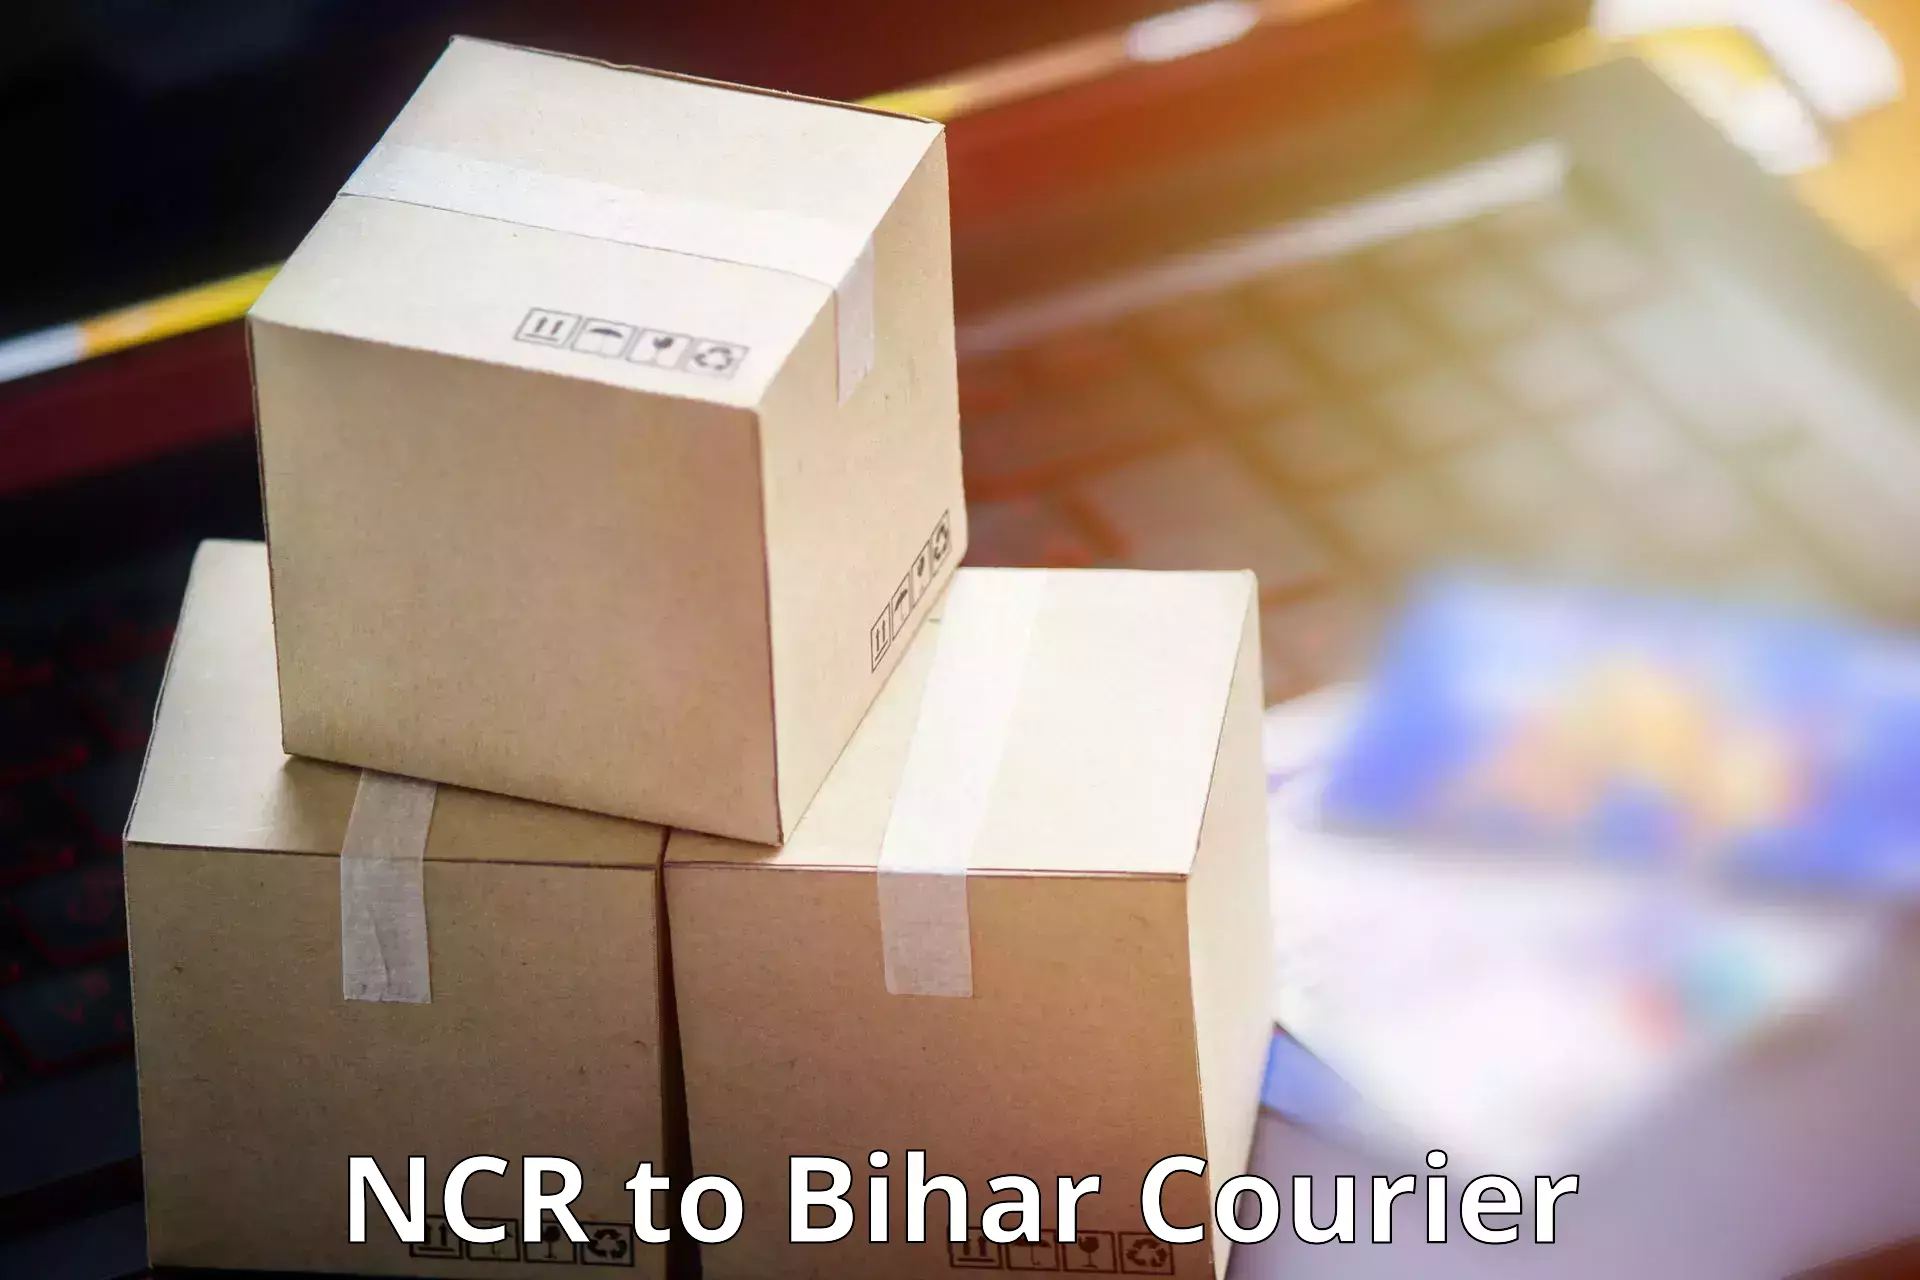 Delivery service partnership NCR to Singhia